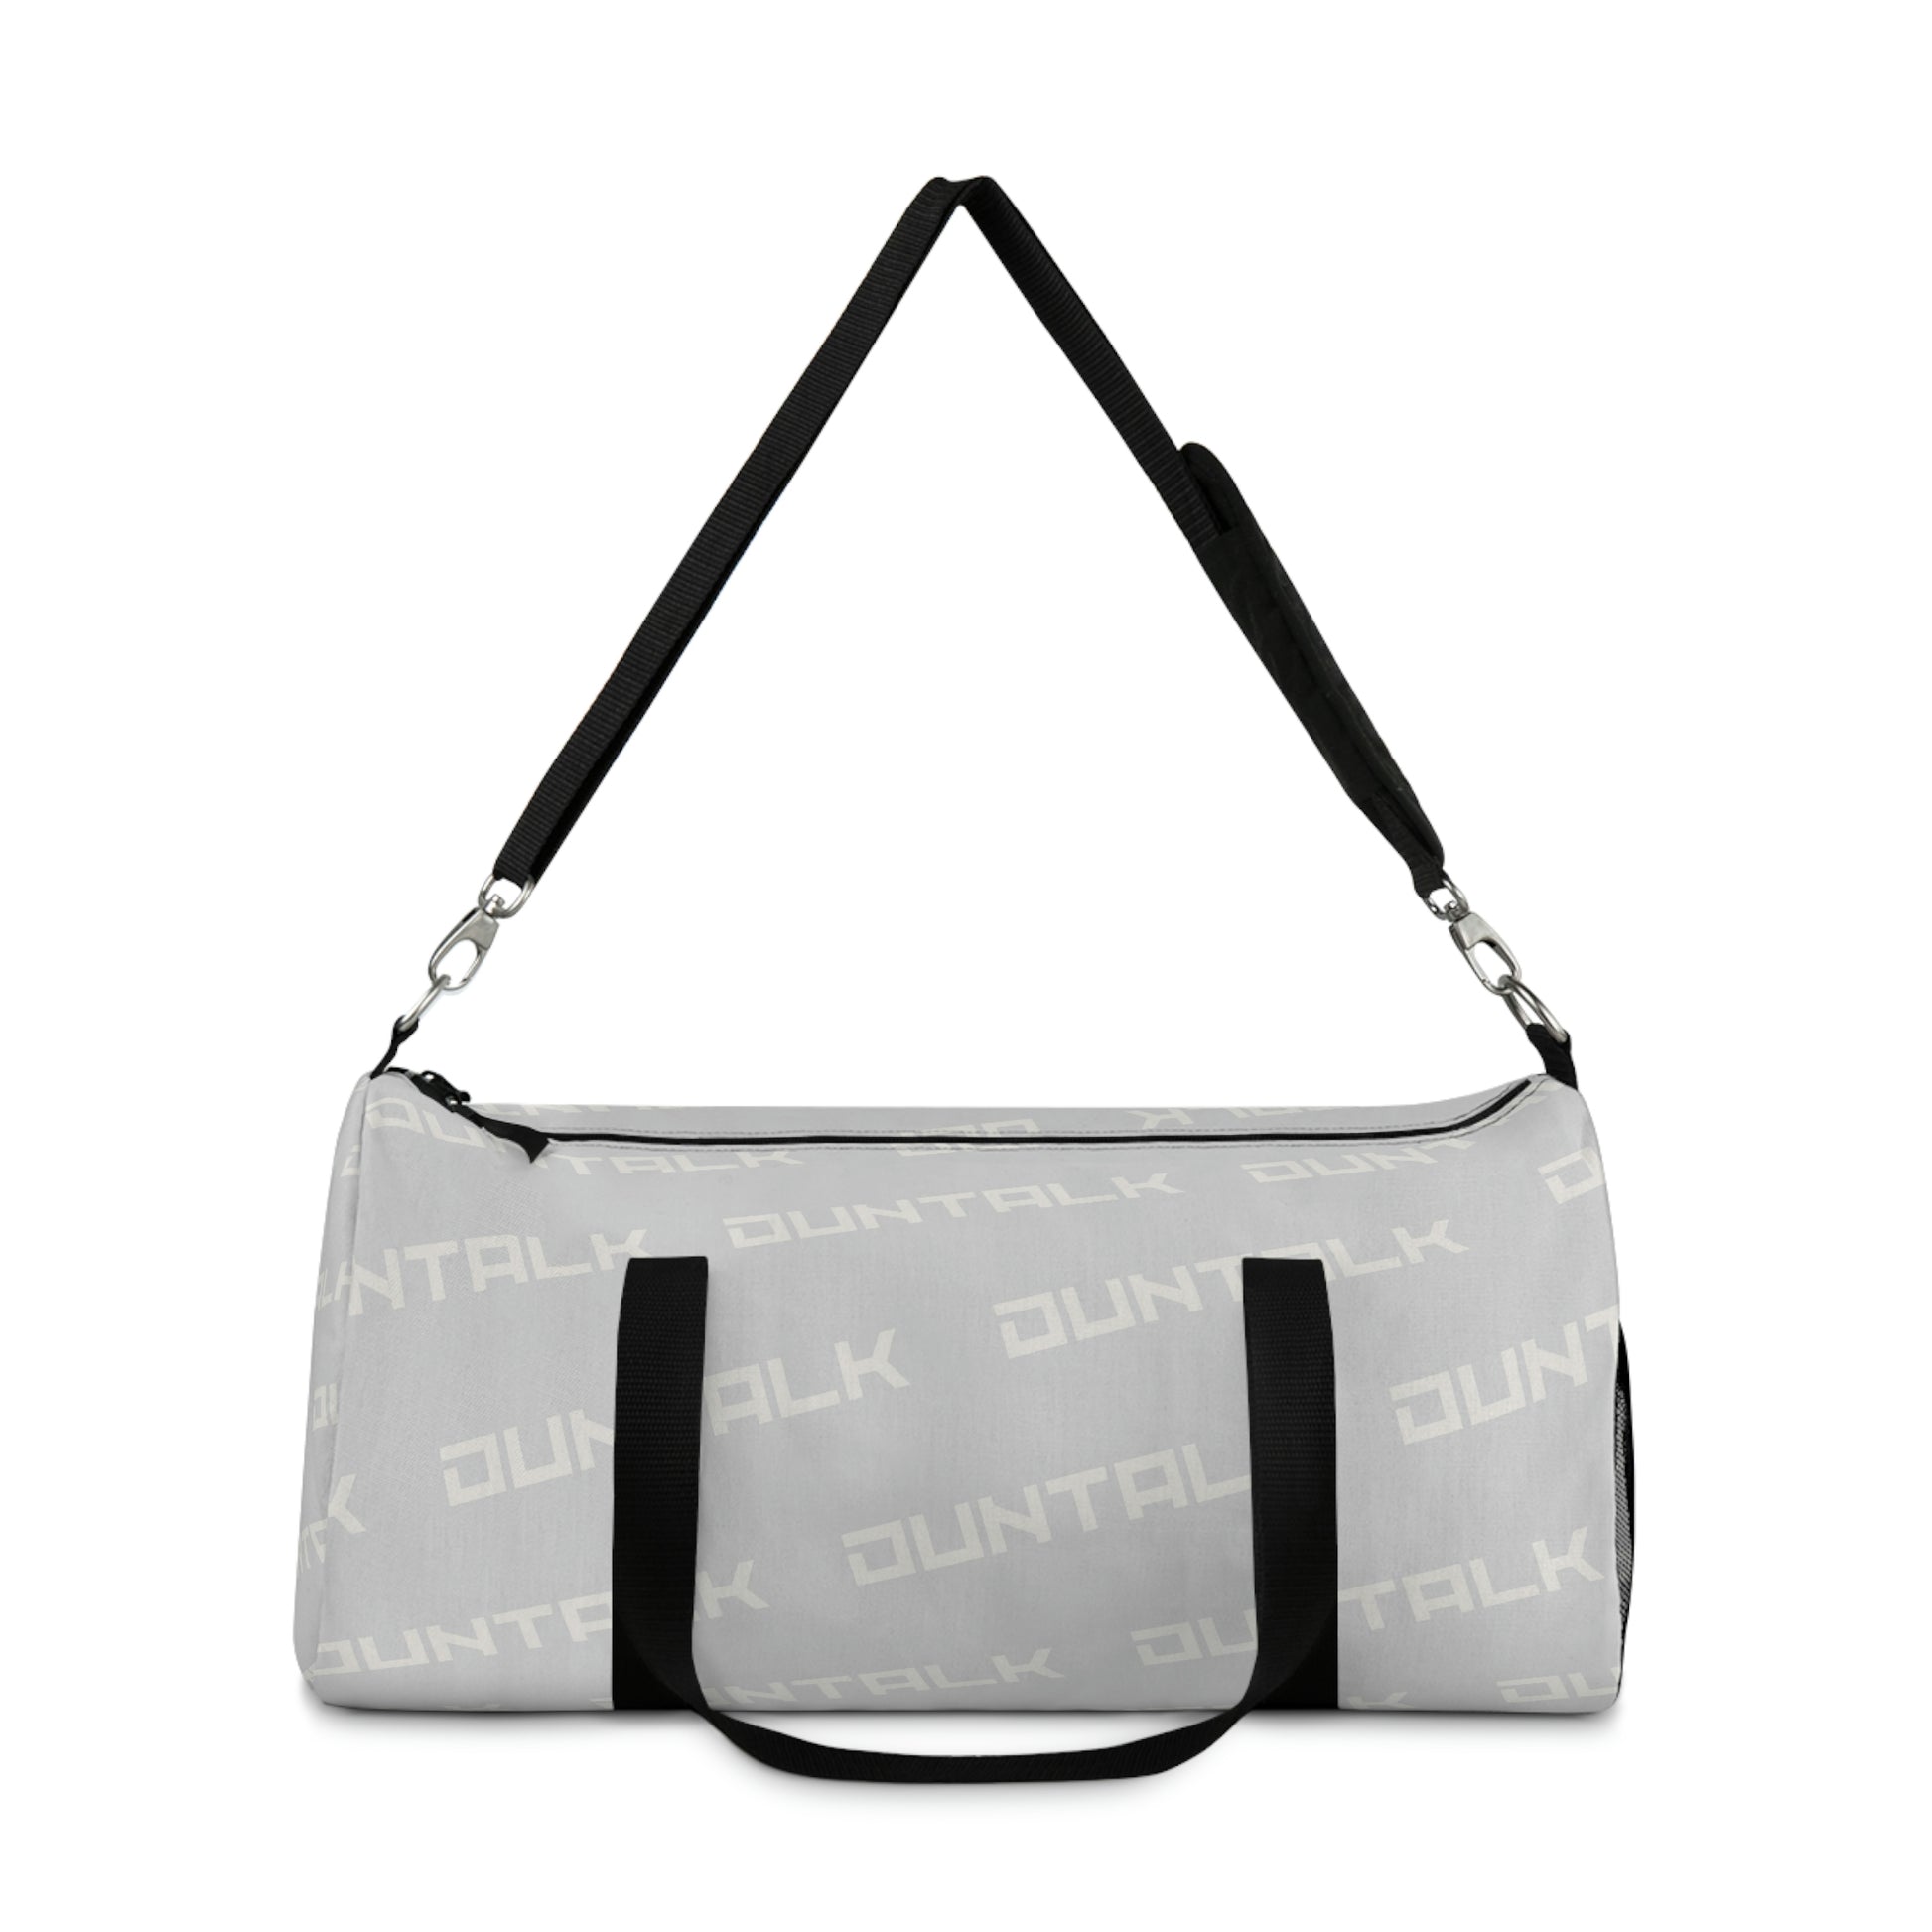 Grey duffle bag with two hand straps and an adjustable arm strap. "Duntalk" repeatedly written on the side in white lettering. Net pocket on the side.